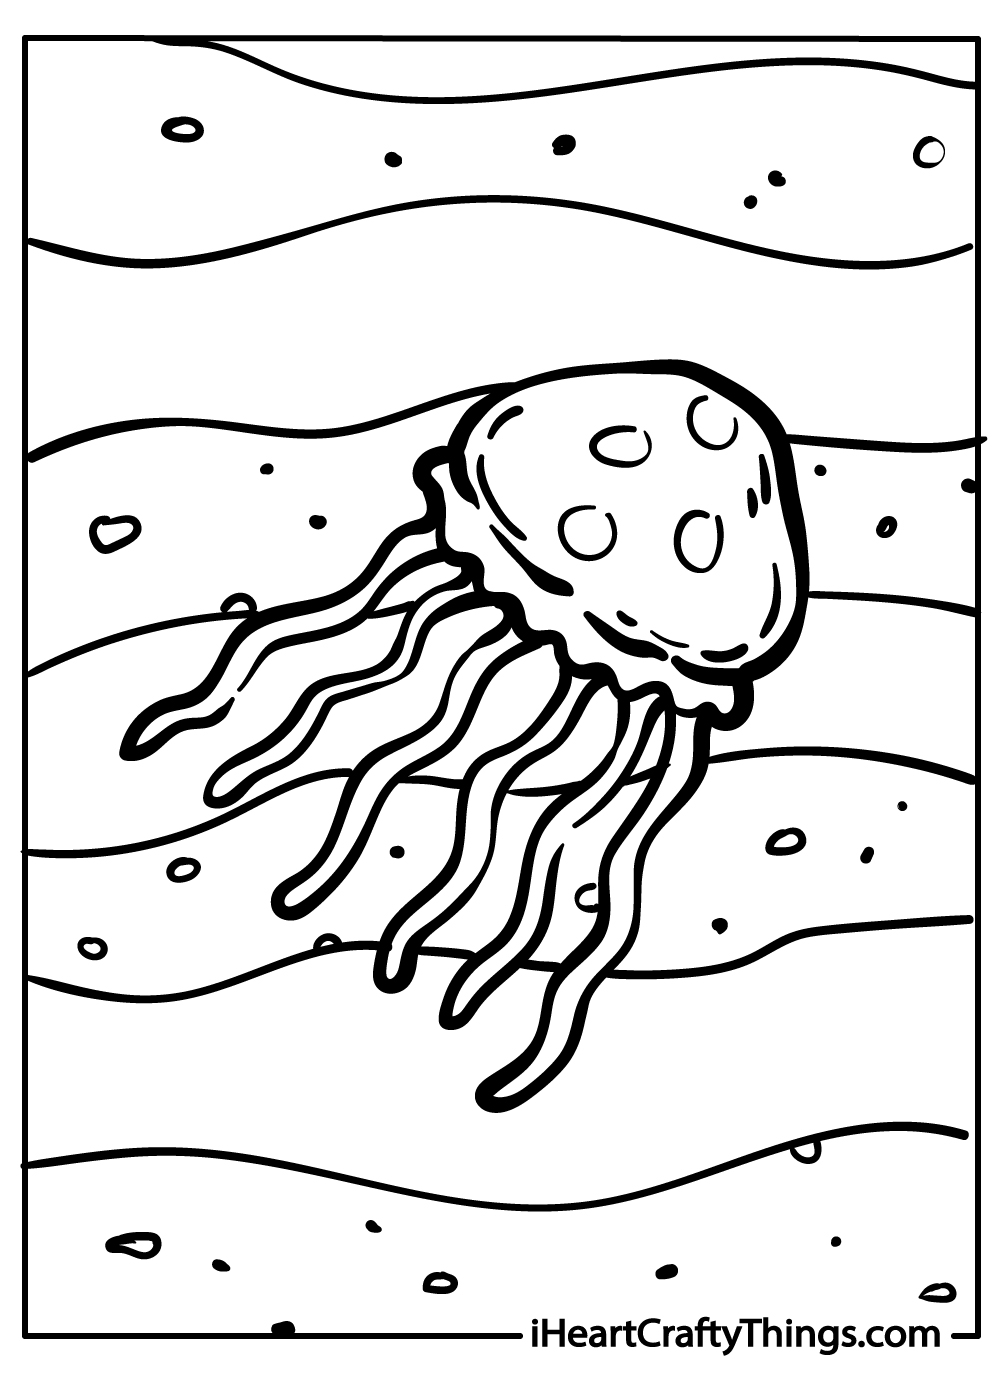 Sea creatures coloring pages free printables